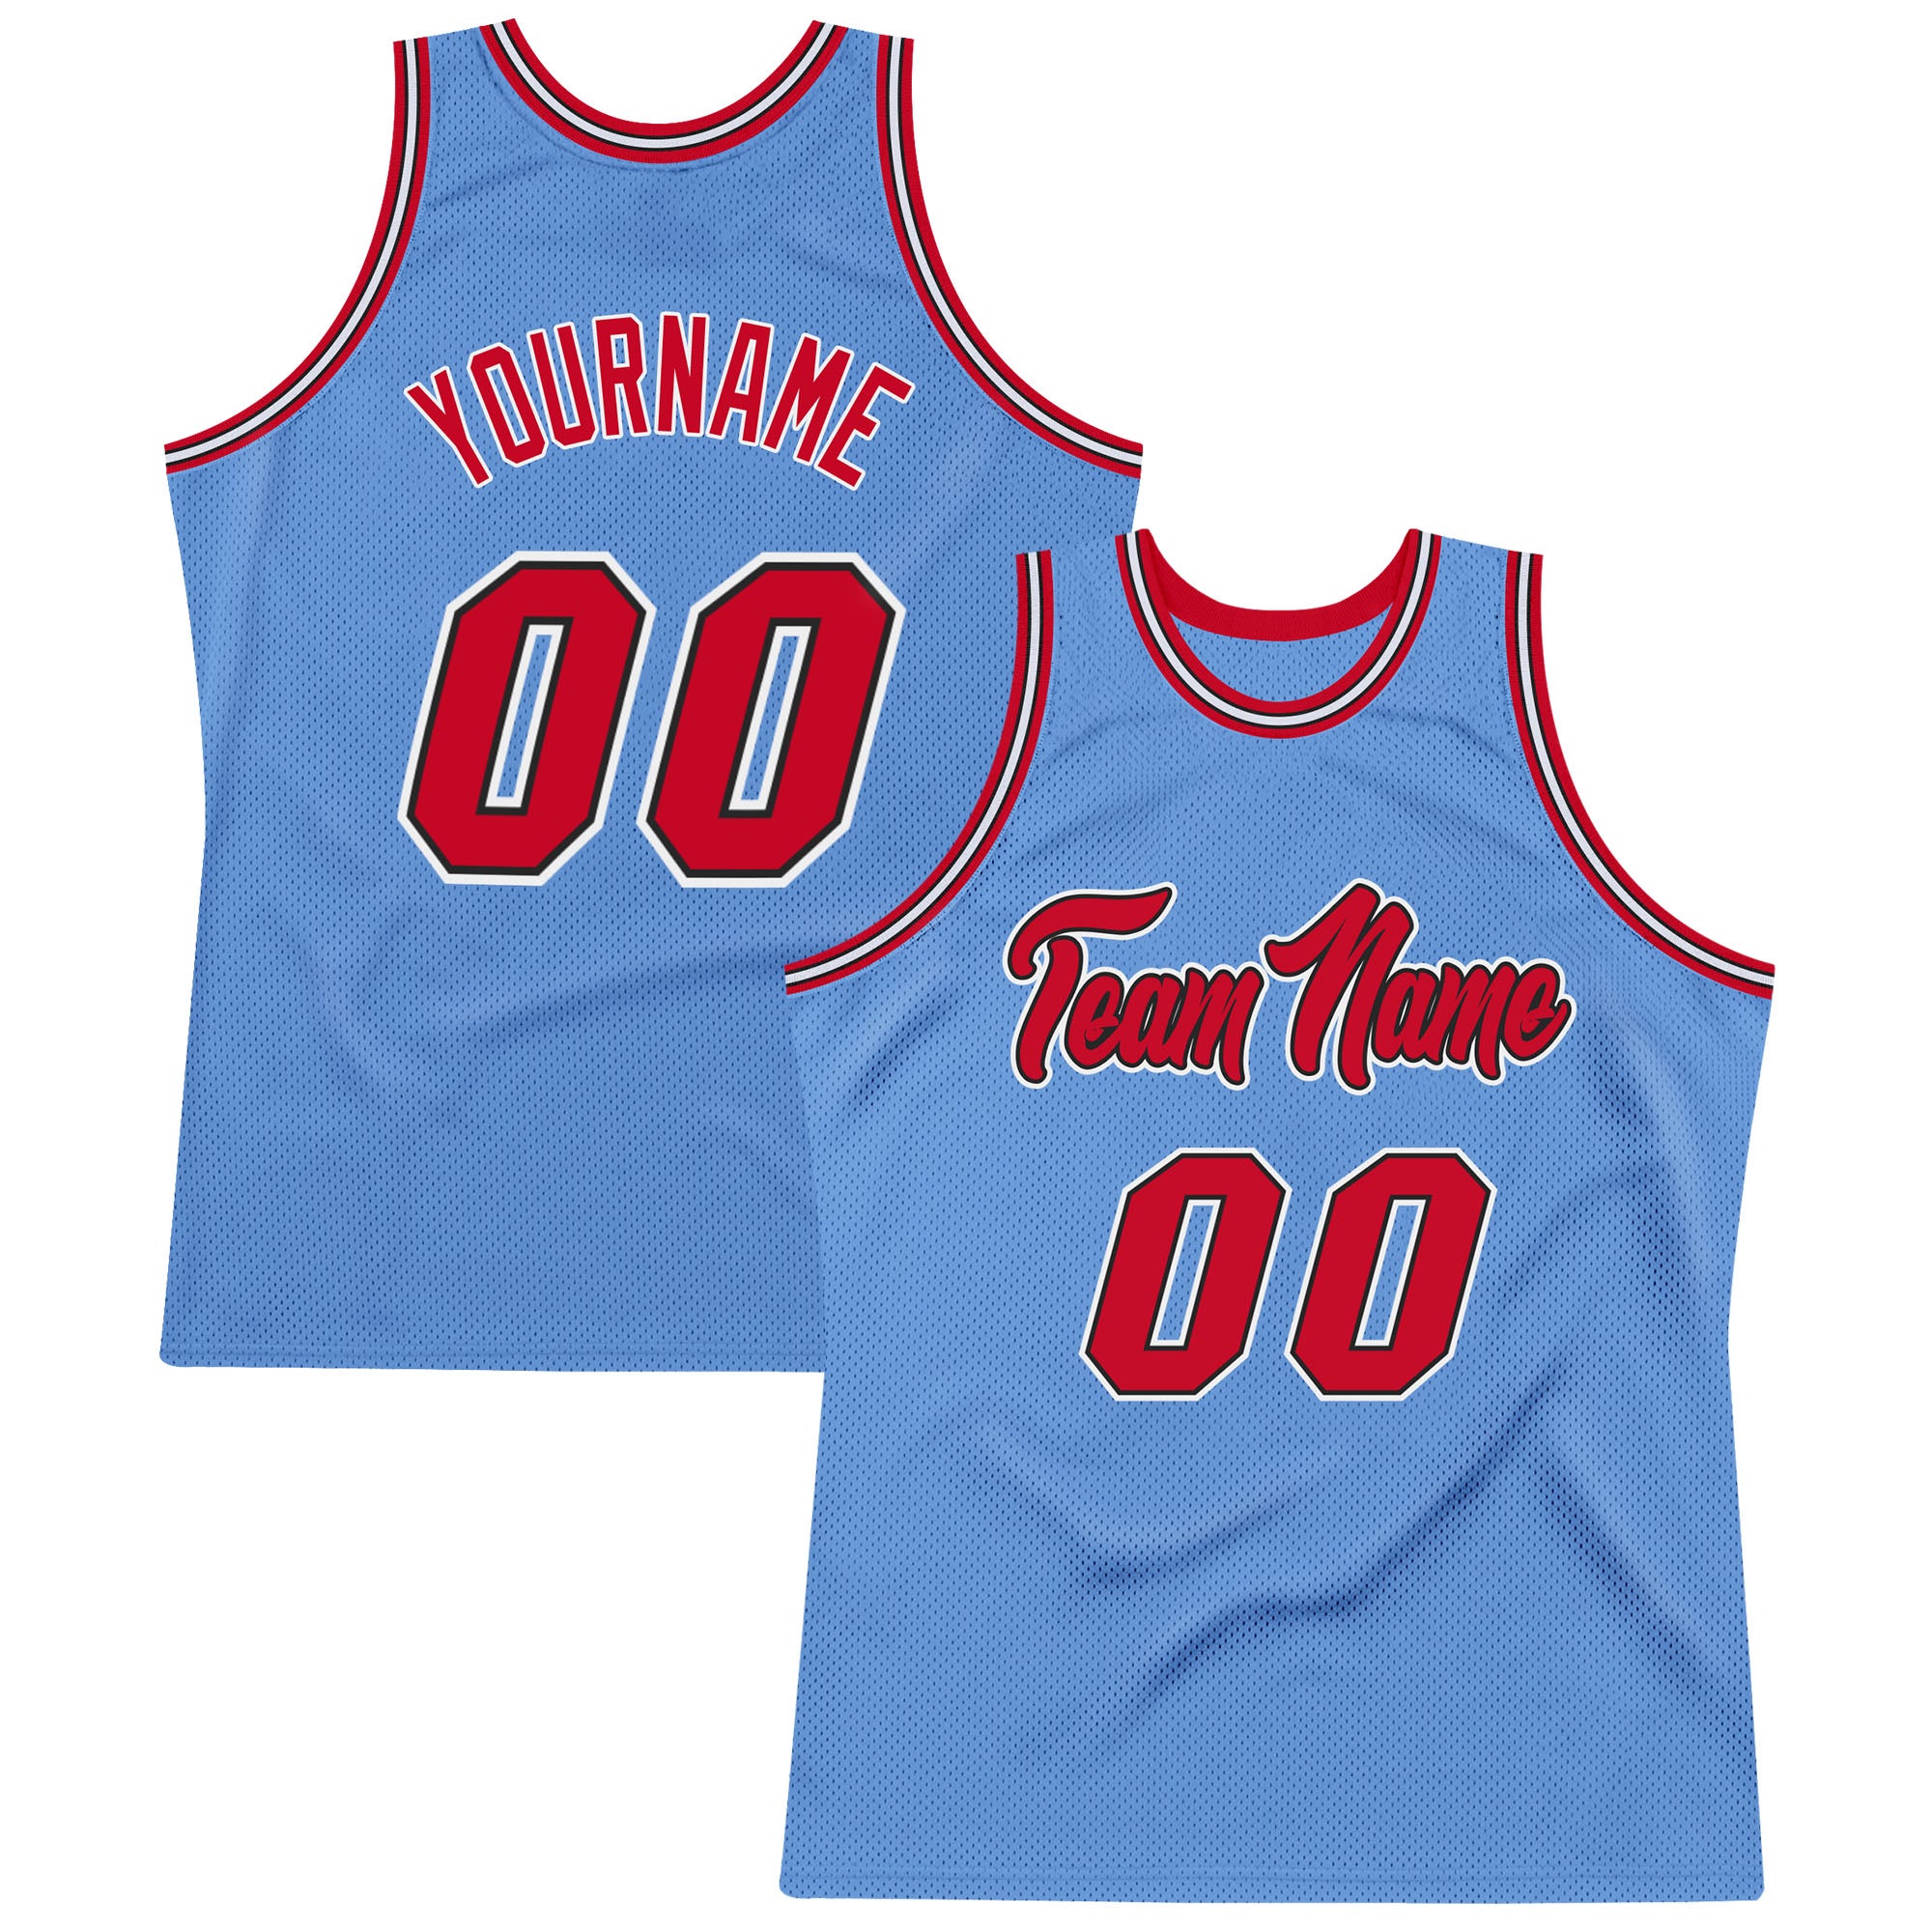 HKsportswear Custom Basketball Jerseys - Red, Black, White and Blue Home and Away - Old School Style - Includes Team Name, Player Name and Player Number